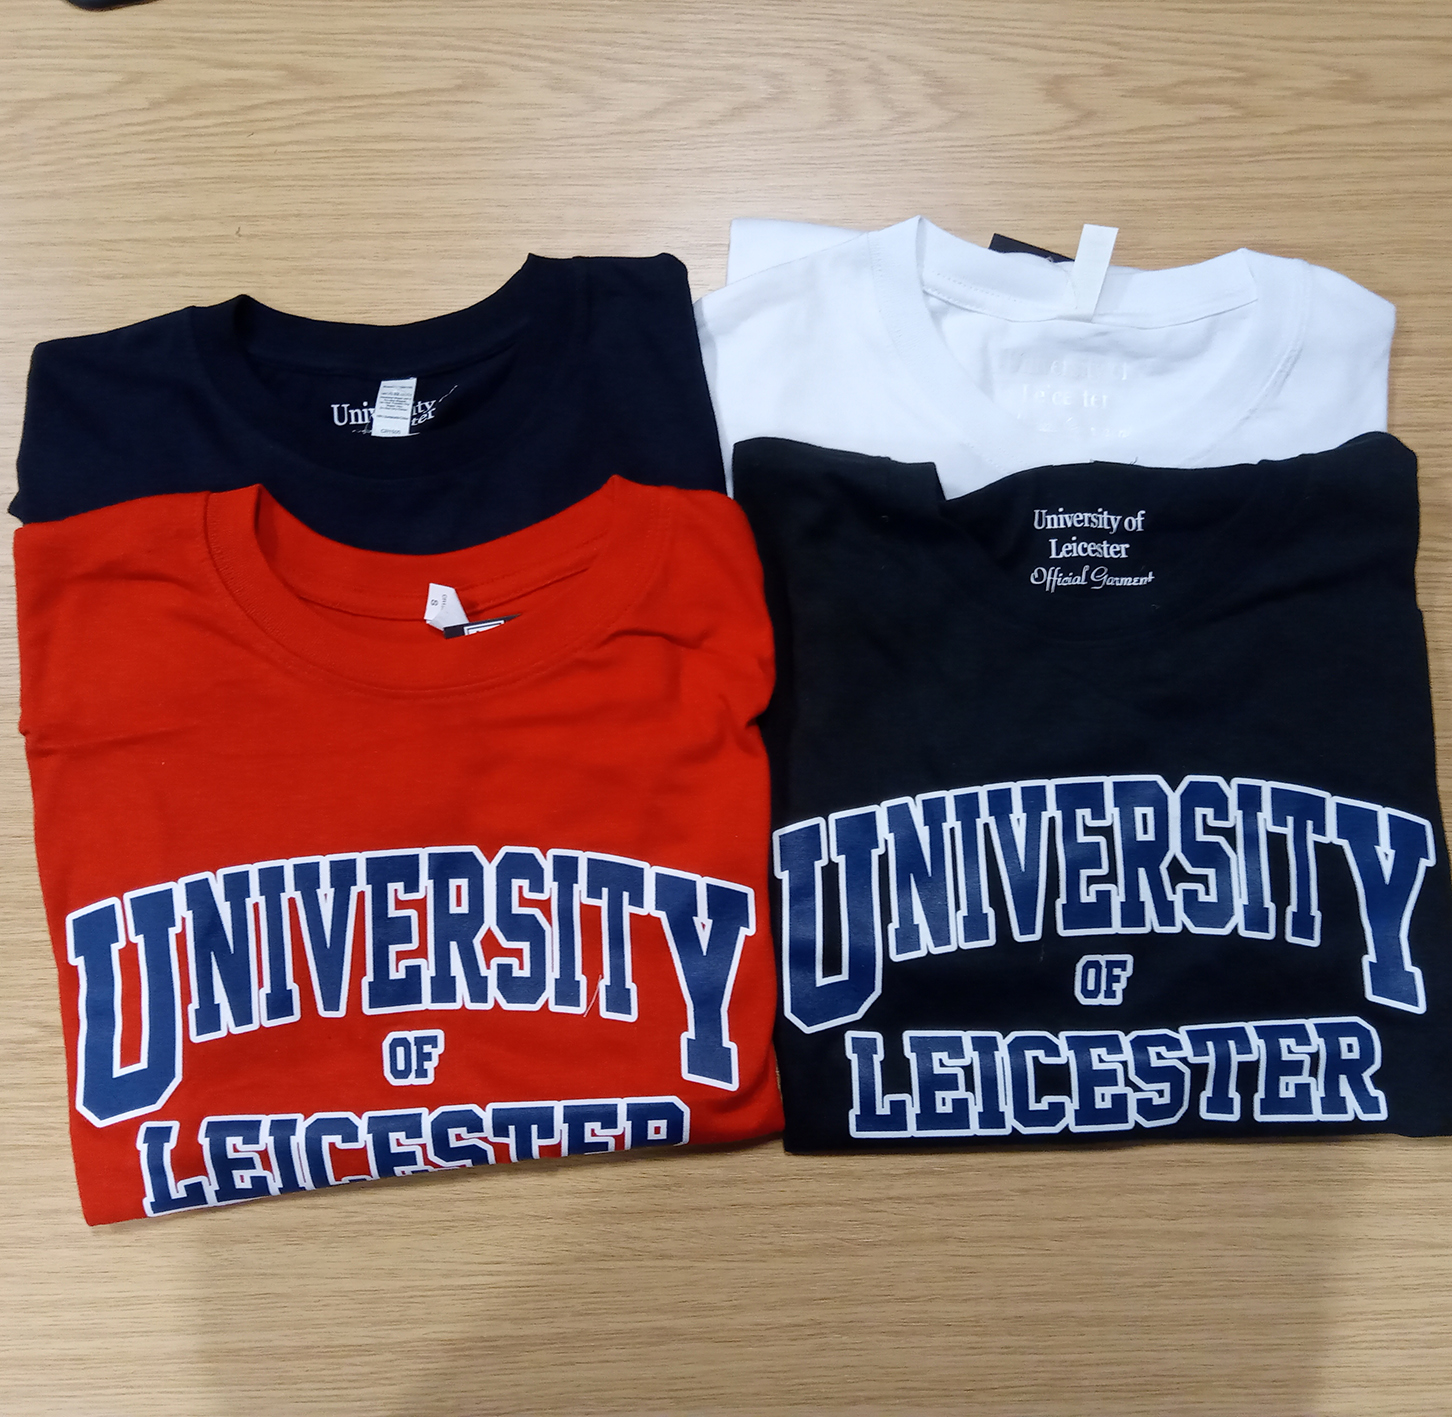 University of Leicester T-Shirts